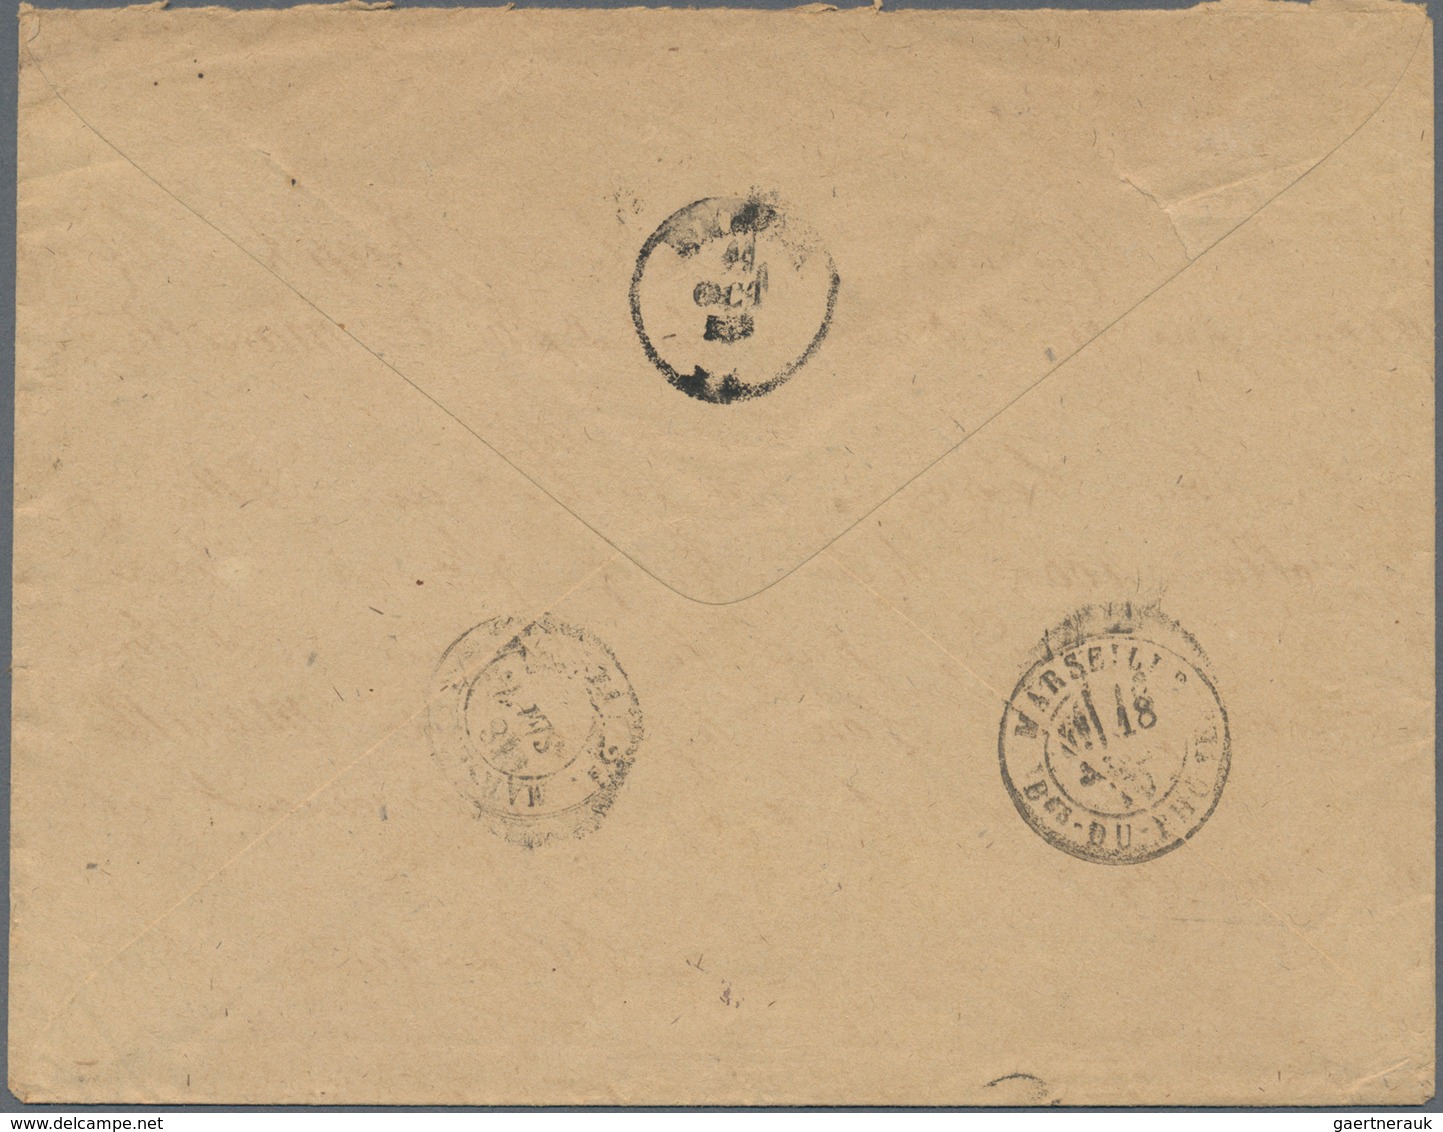 09617 Philippinen: 1879. Envelope Addressed To The French Scientific Mission In Manila, Philippines Bearin - Philippines